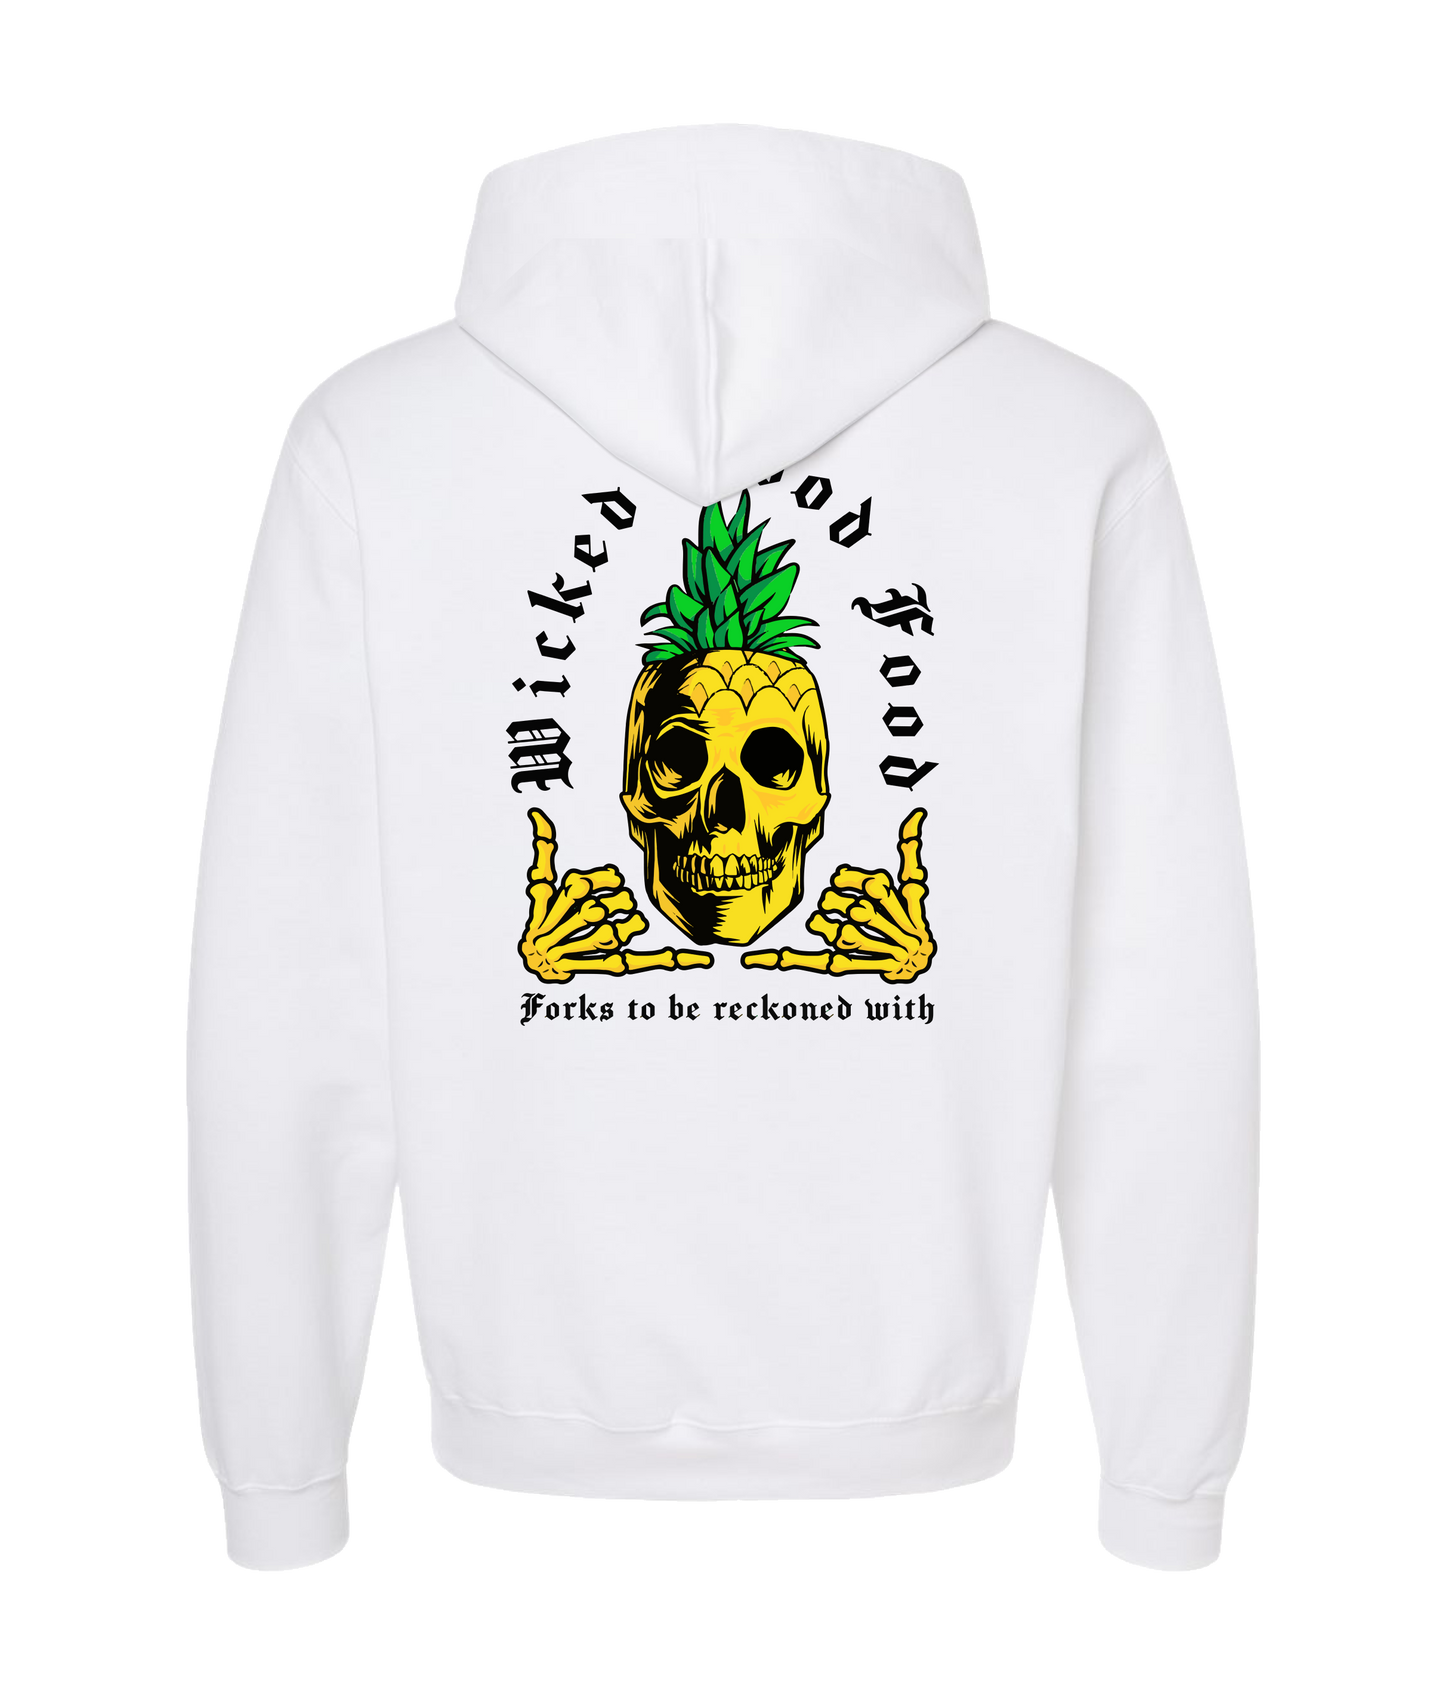 The Wicked Kitchen - 2 Sided Forks - White Hoodie